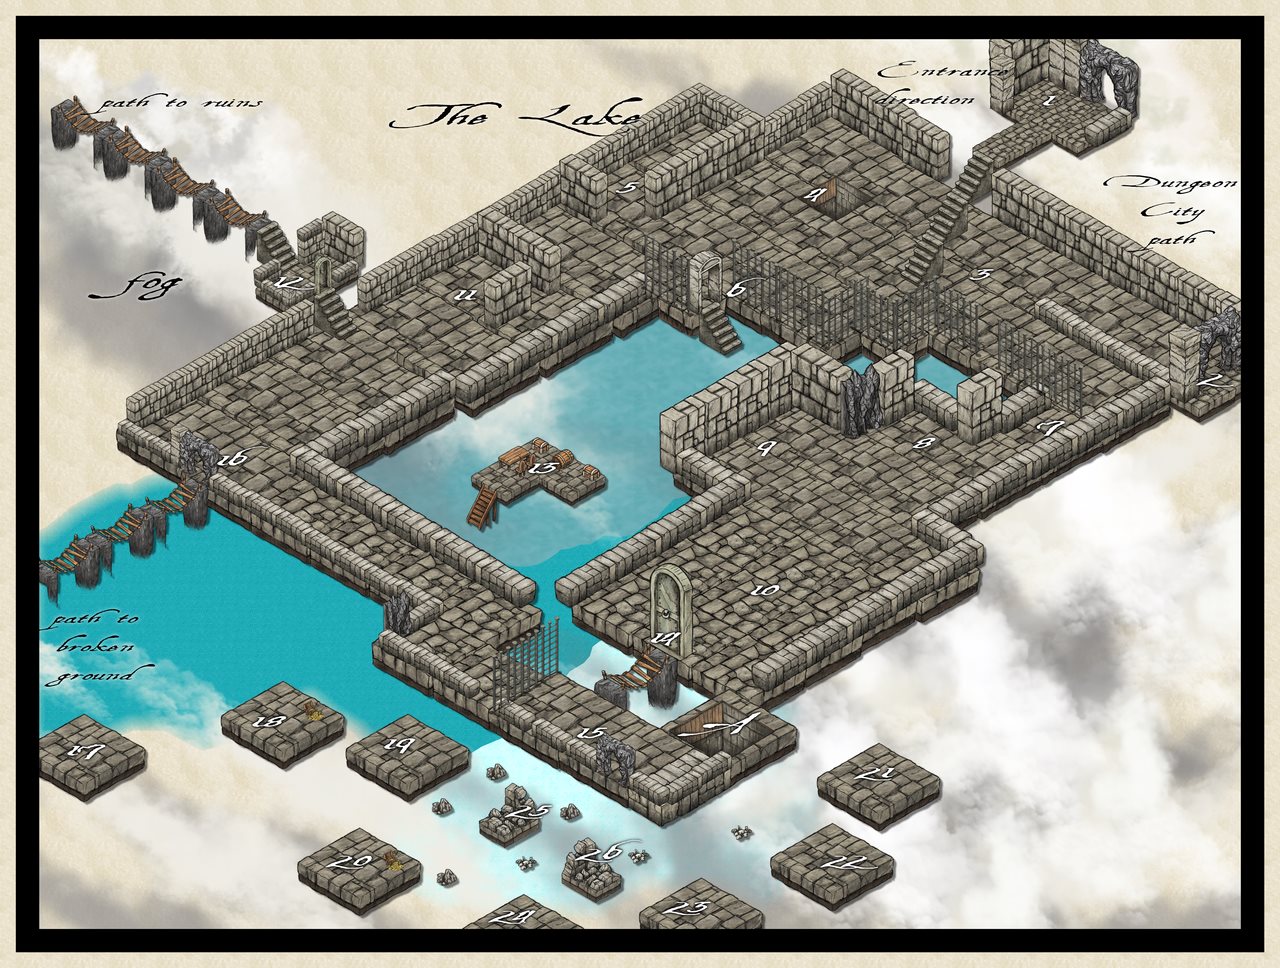 Nibirum Map: dungeon city small lake by JimP